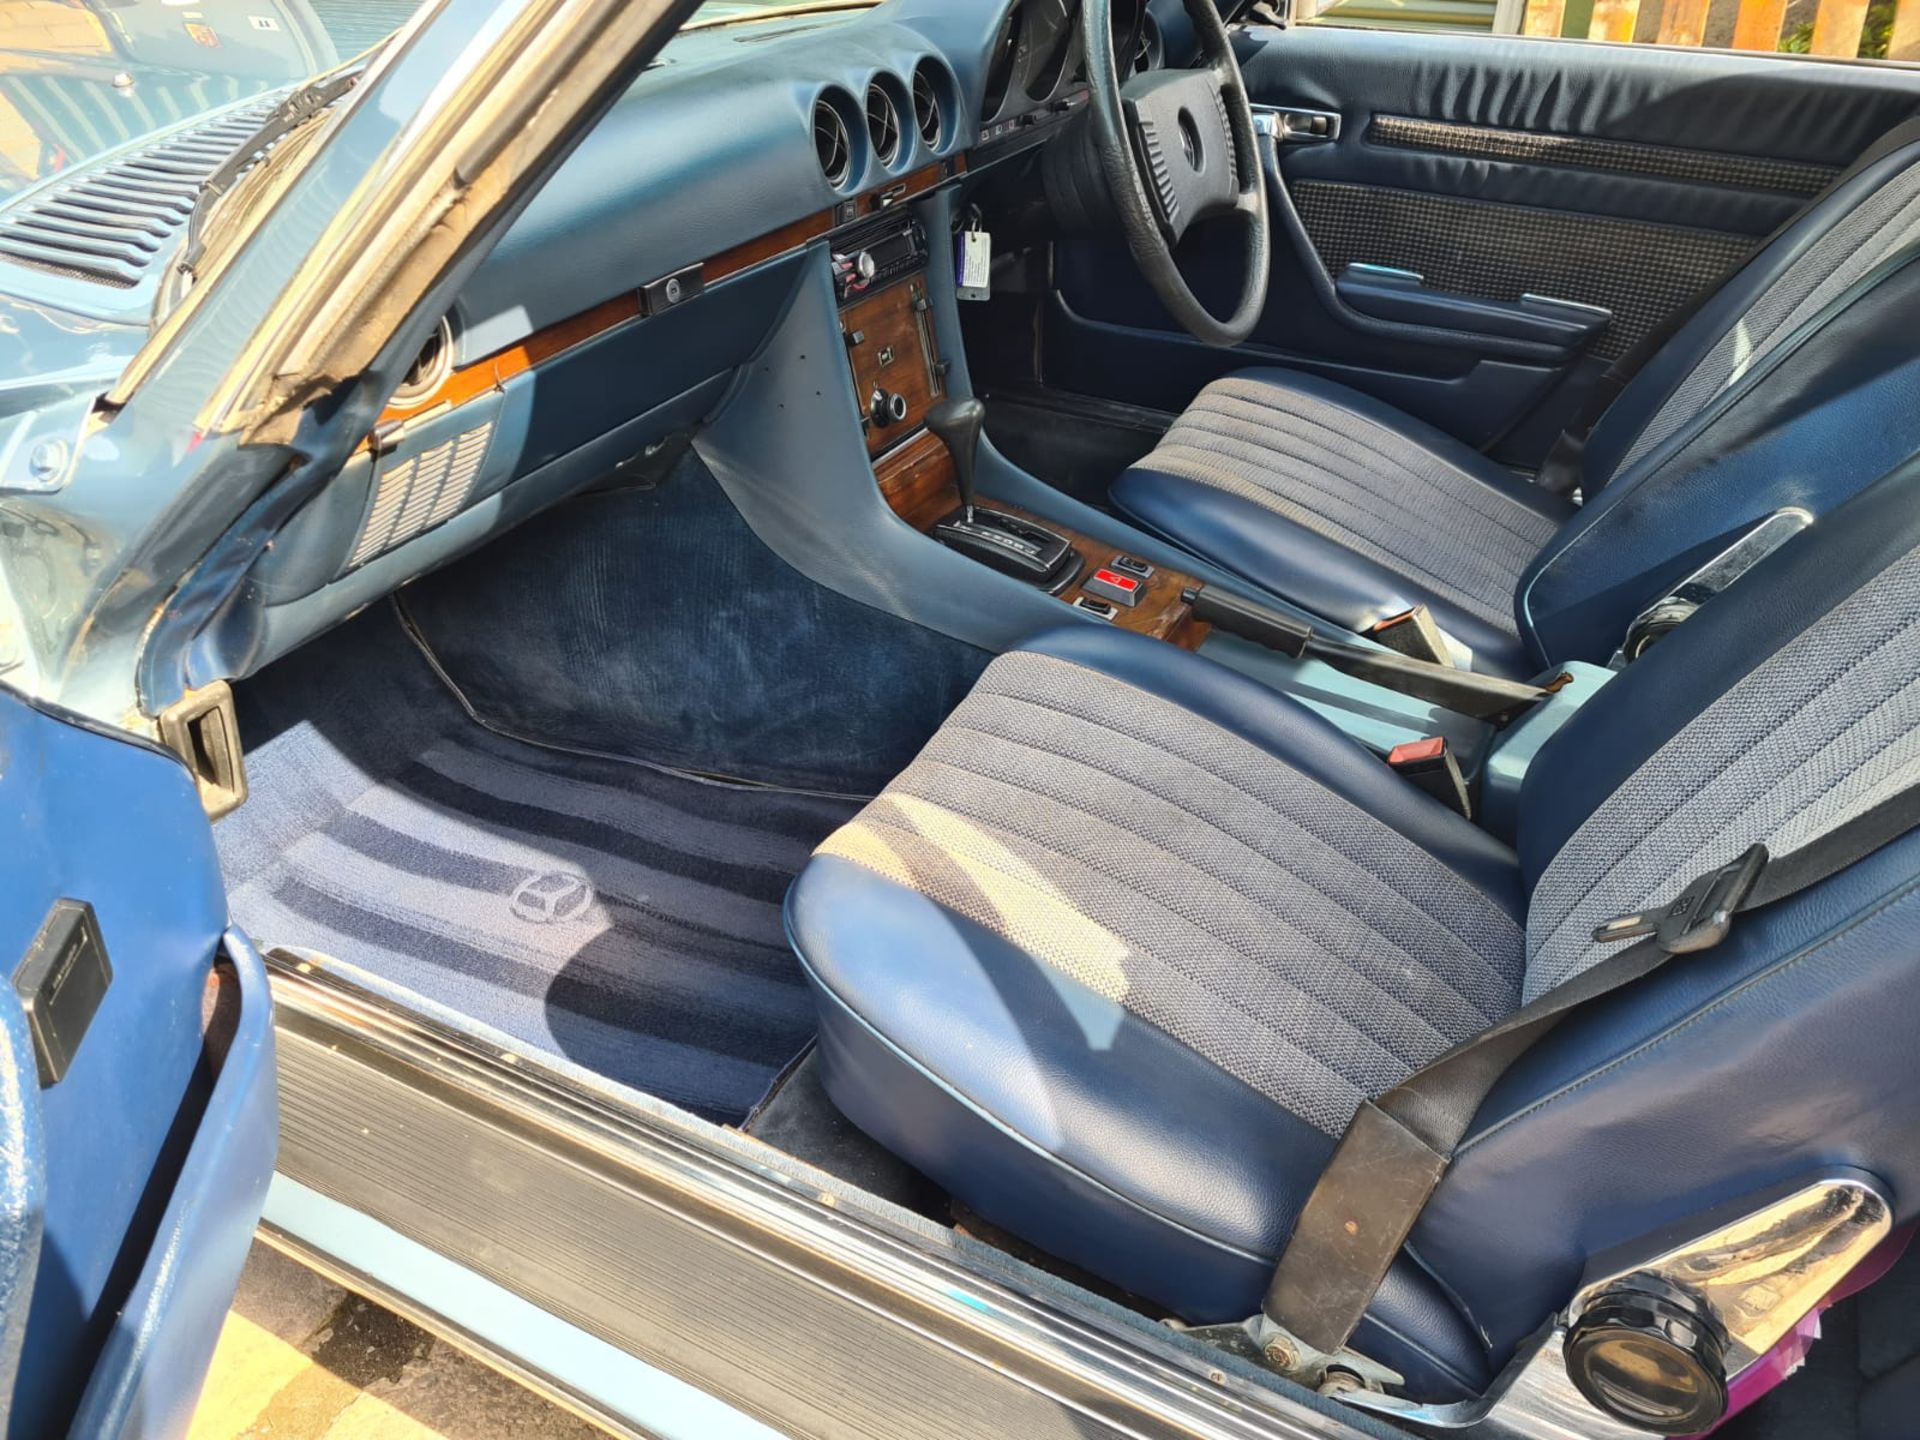 Stunning 1979 Mercedes Benz SL350 V8 With Factory Hardtop - Restored in 2018 - Image 6 of 22